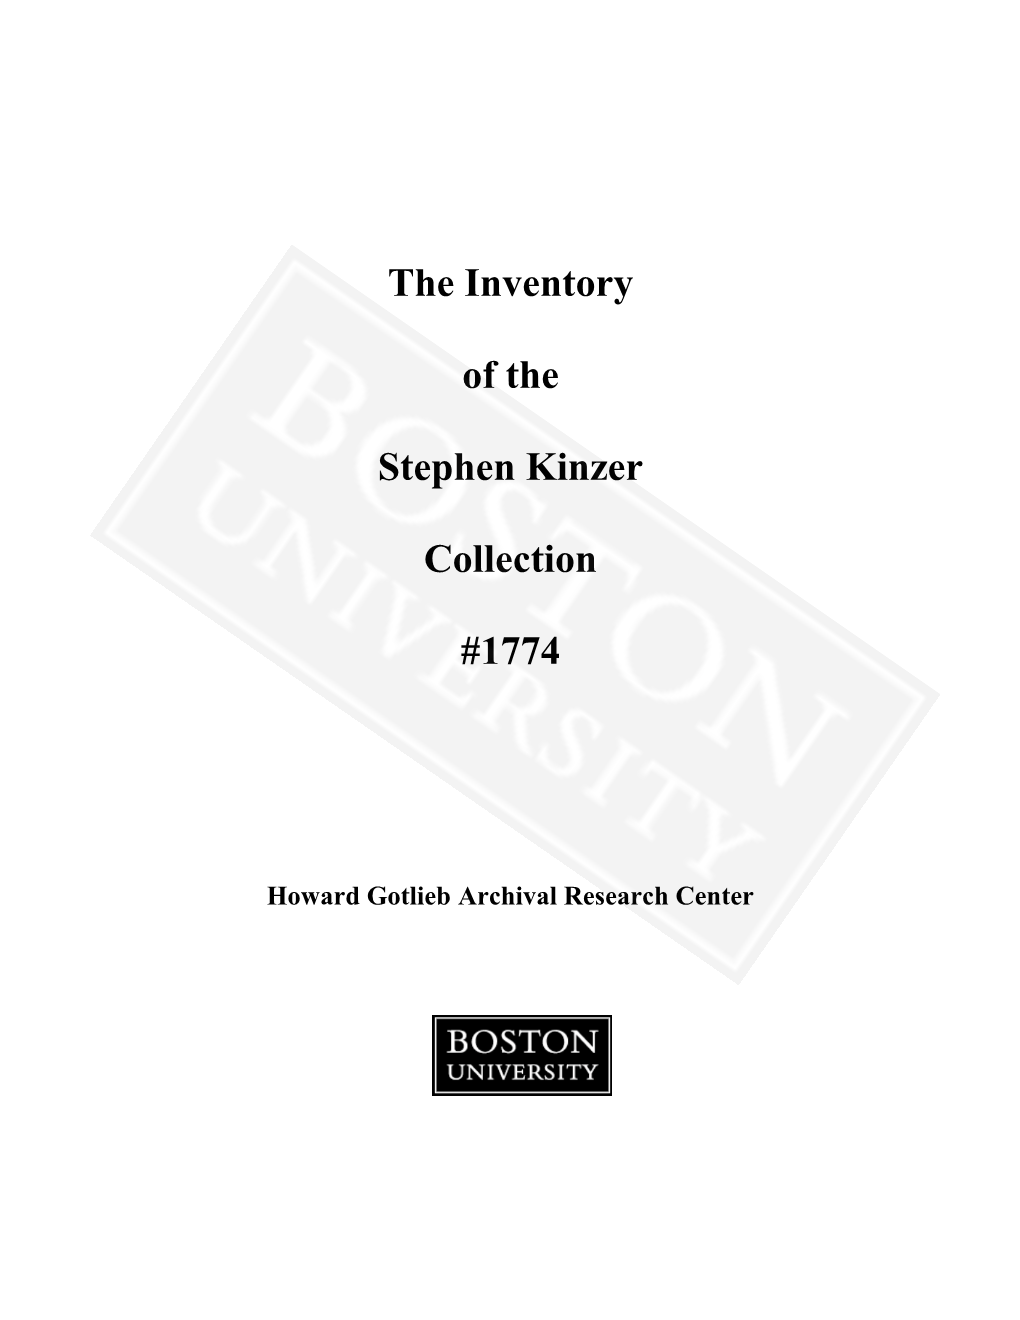 The Inventory of the Stephen Kinzer Collection #1774